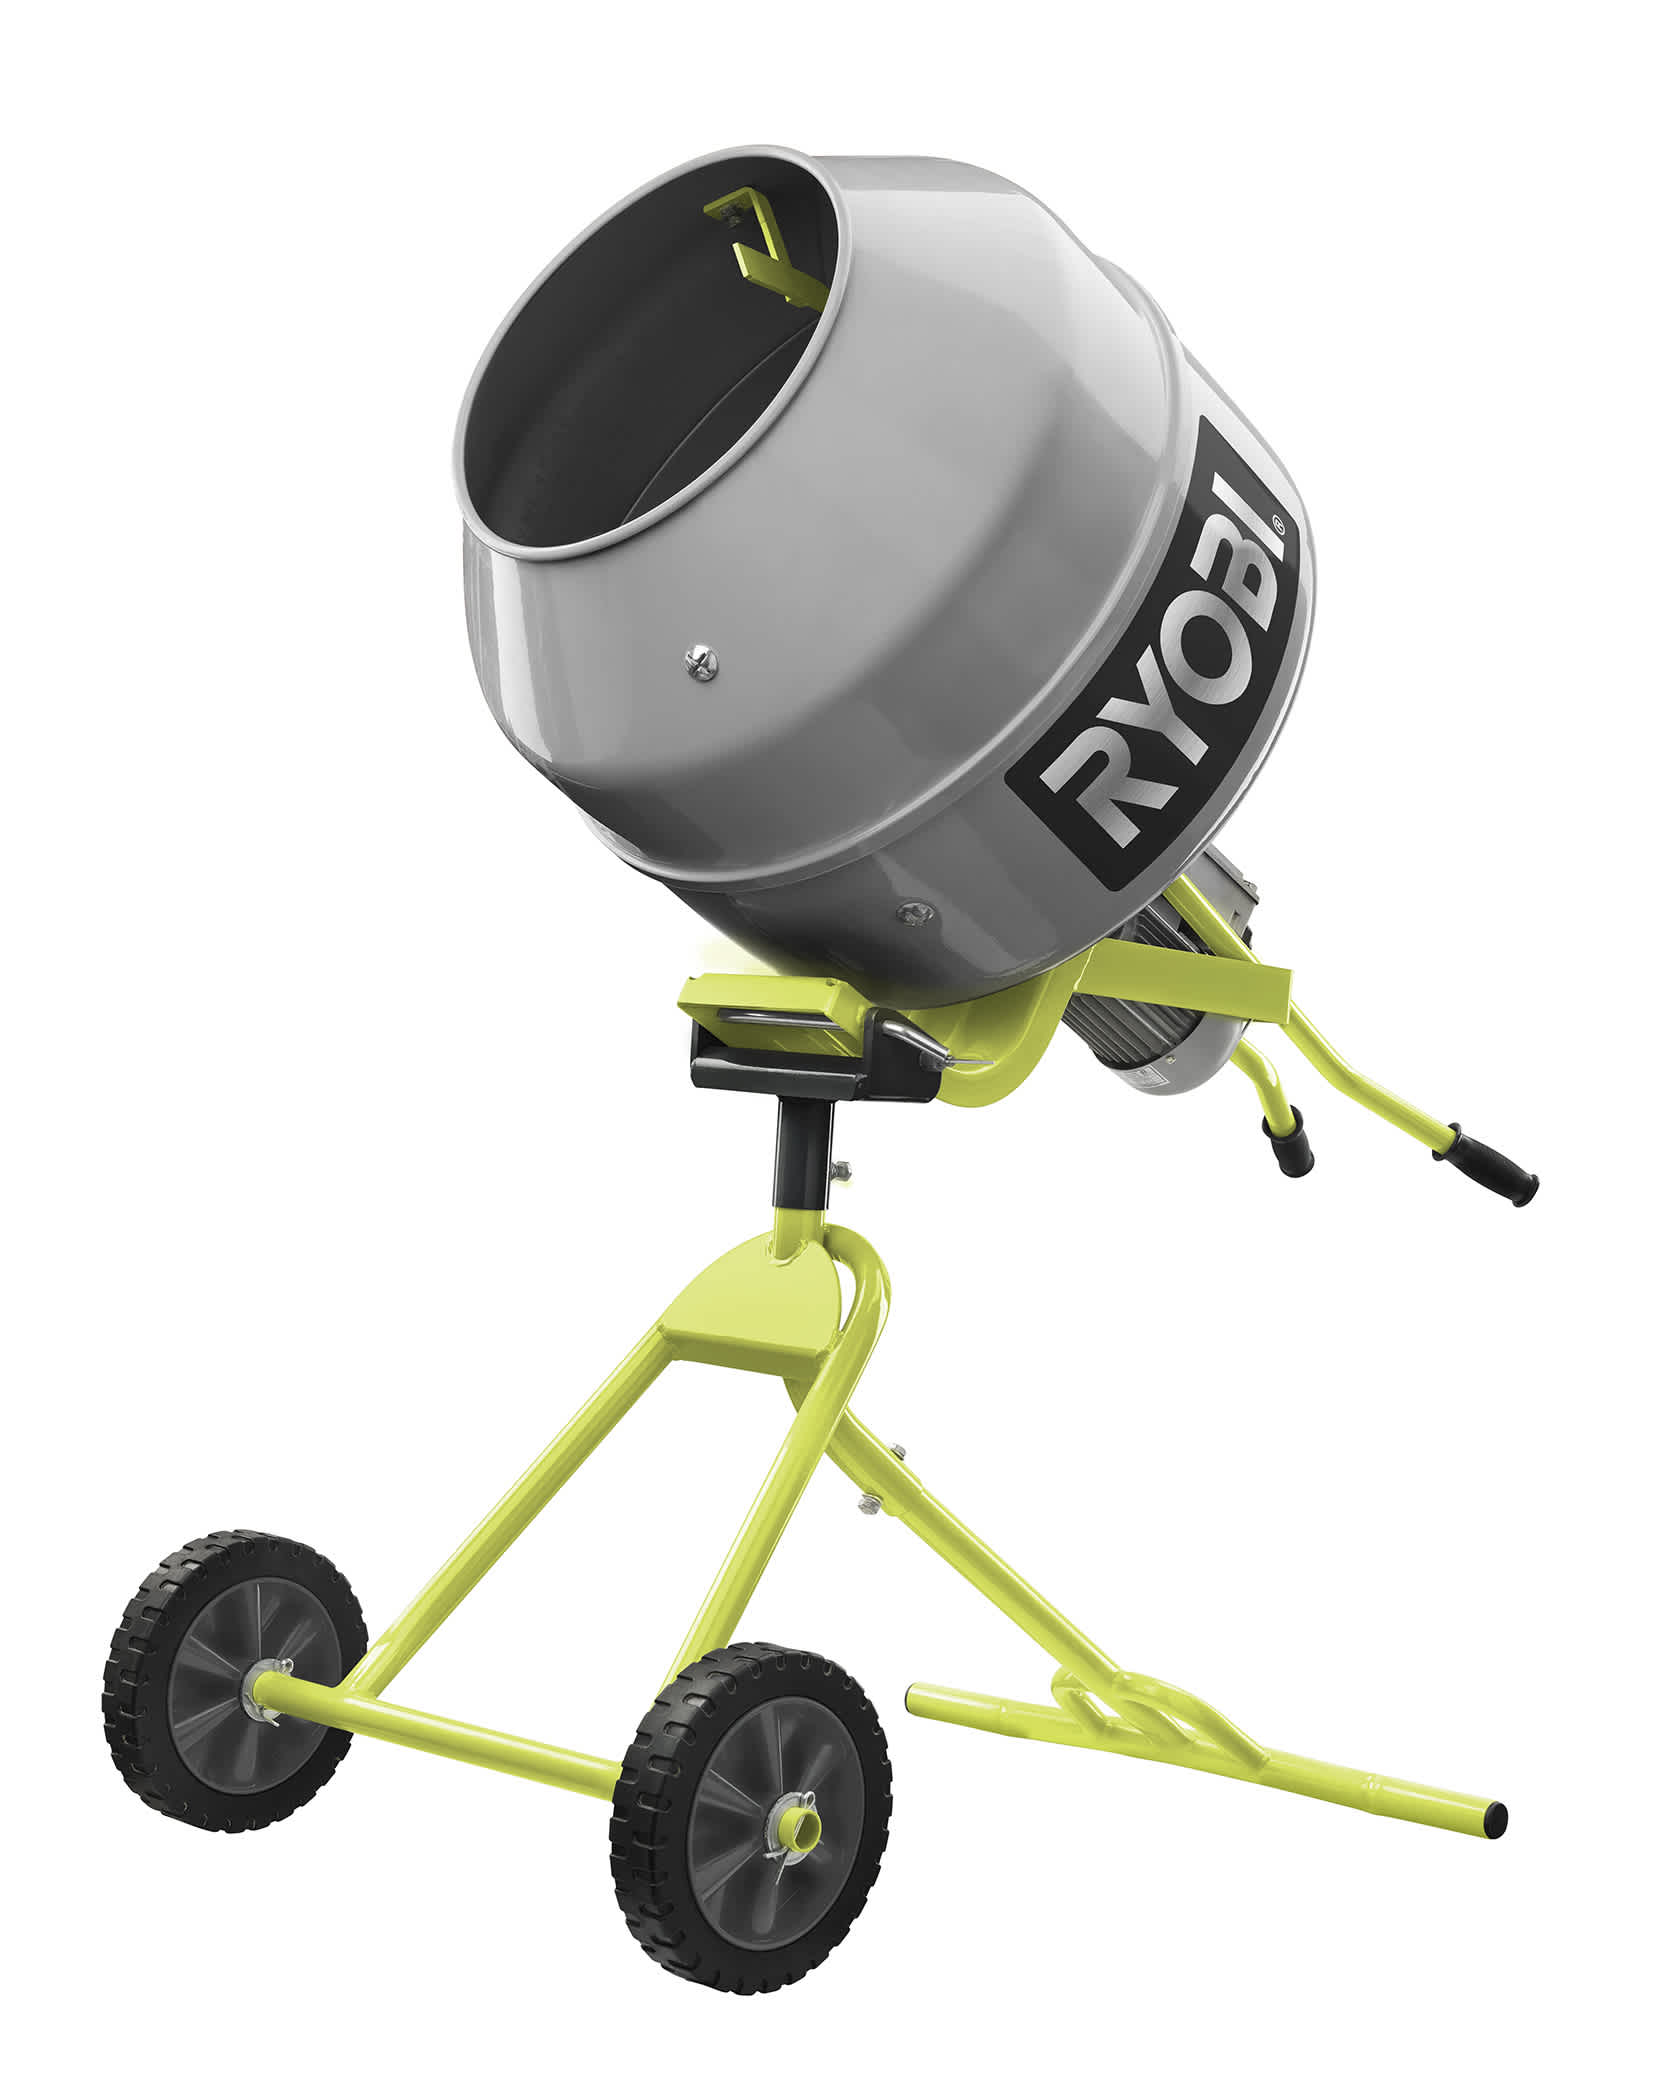 Feature Image for Portable Cement Mixer.